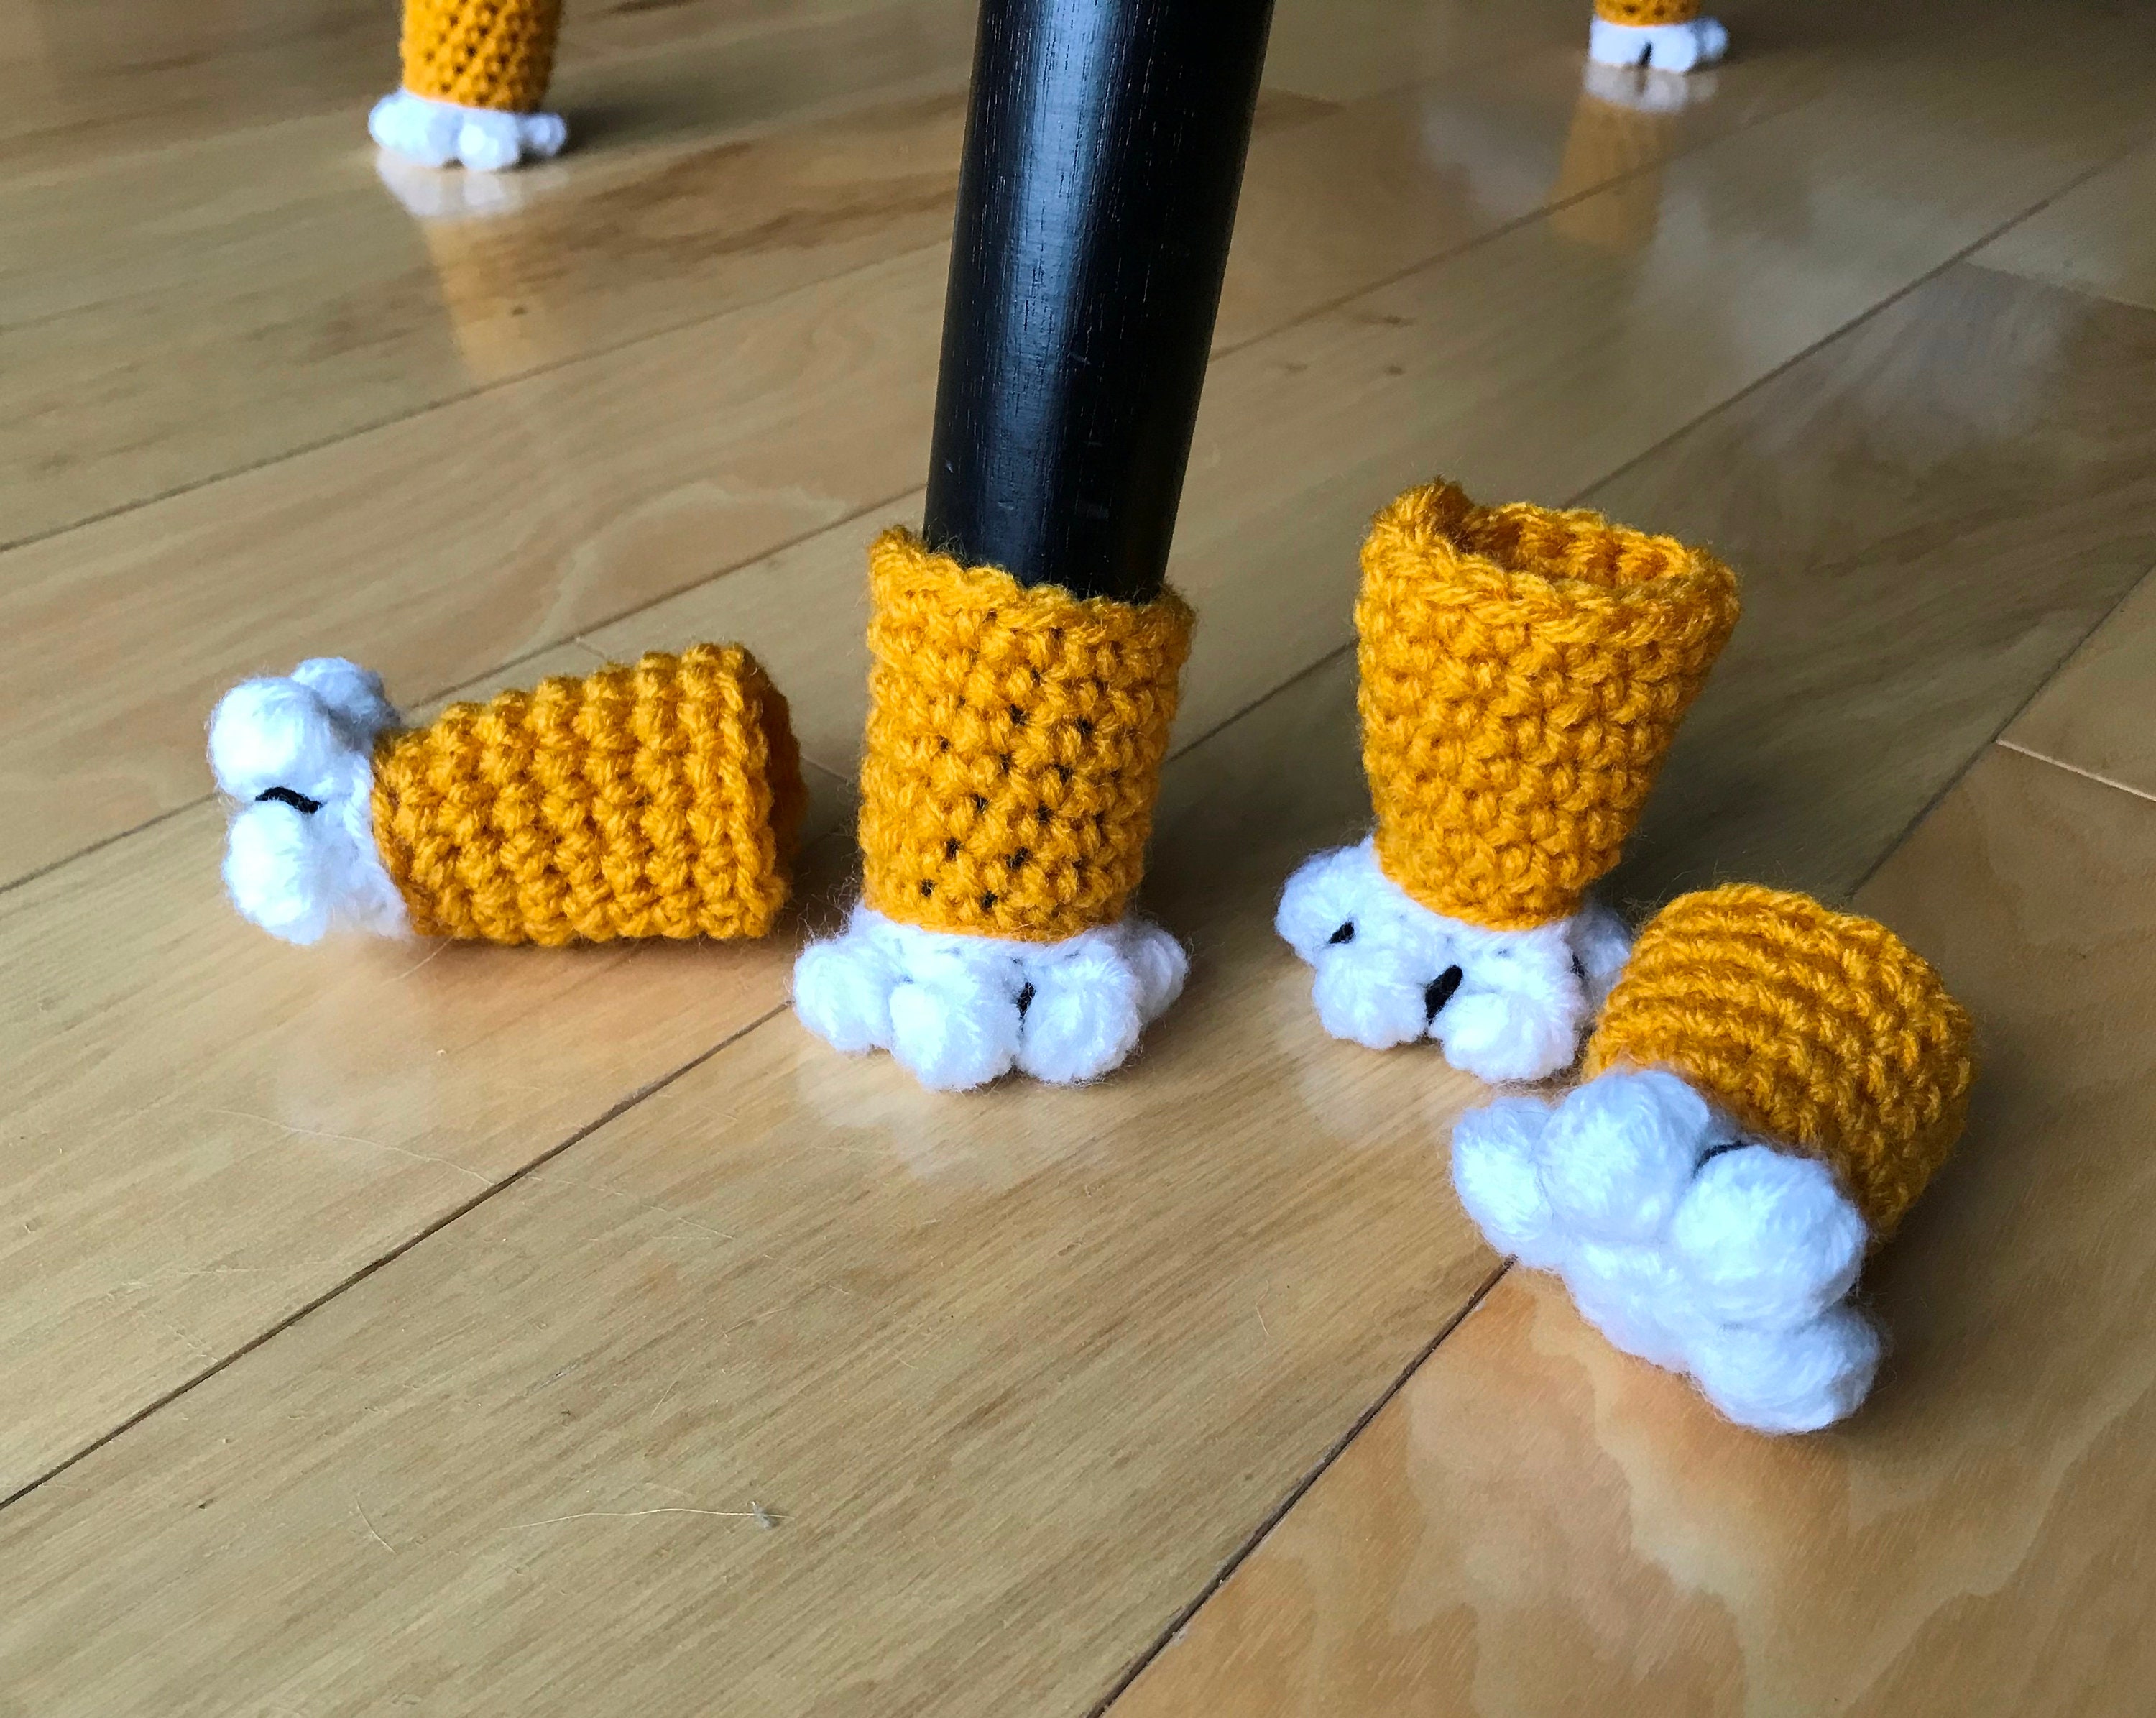 Currently making cat paw chair socks, and I'm dying over how cute